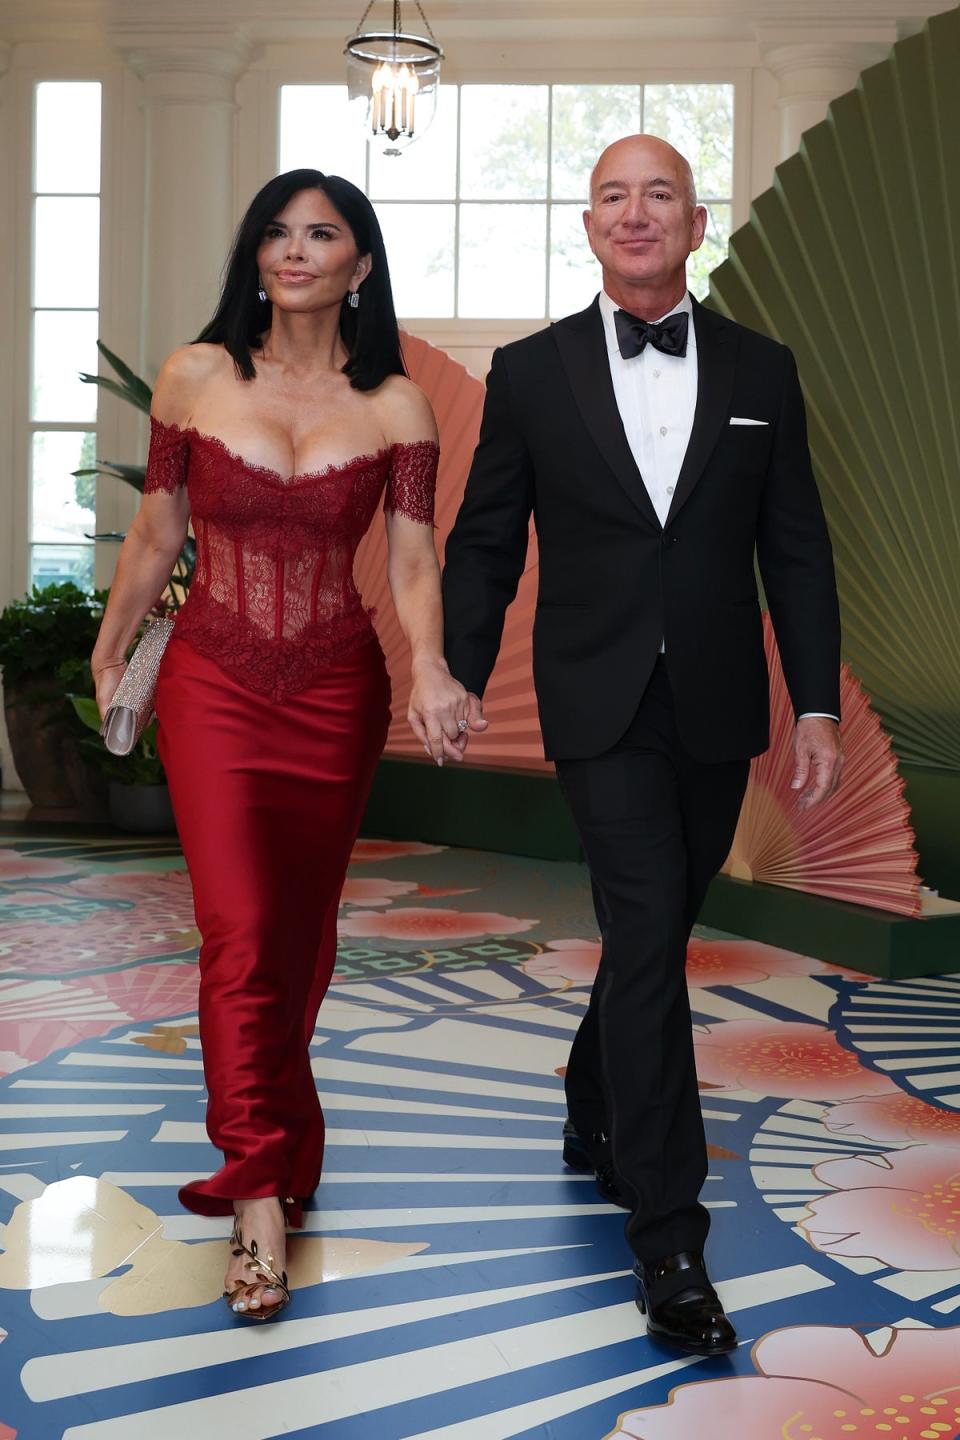 Jeff Bezos and his fiancee Lauren Sanchez arrive at the White House for the state dinner (Getty Images)